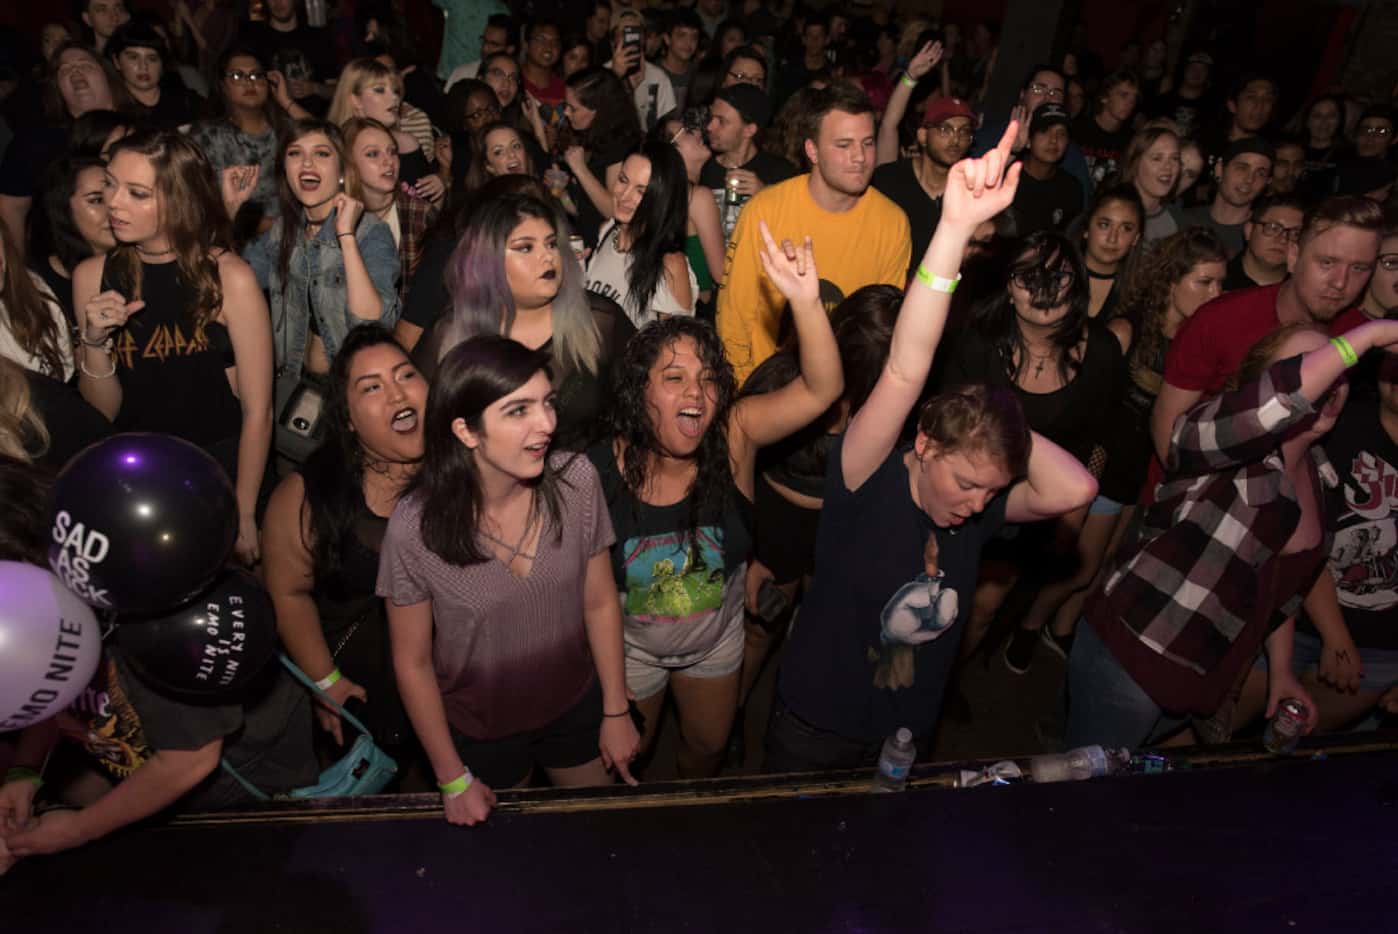 Emo Nite attendees are very active on social media, posting photos, videos and song...